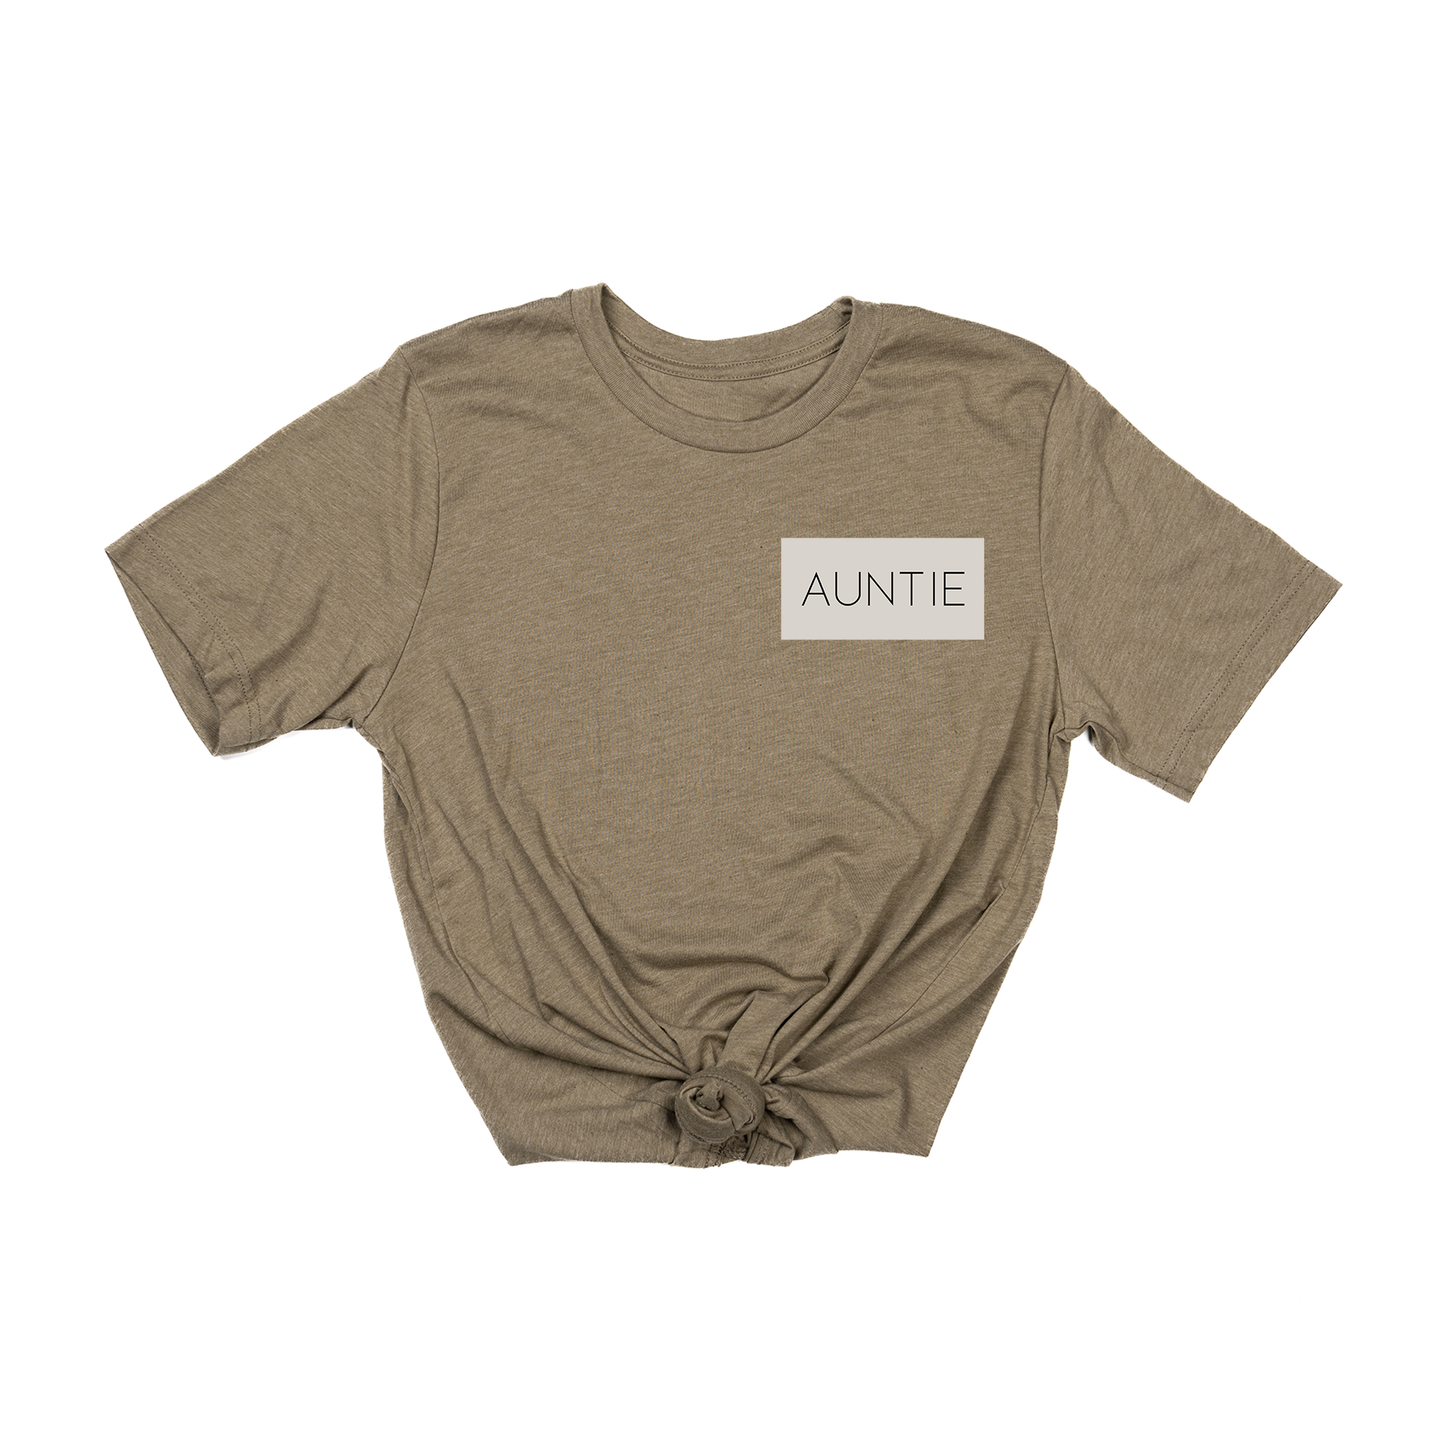 Auntie (Boxed Collection, Pocket, Stone Box/Black Text) - Tee (Olive)